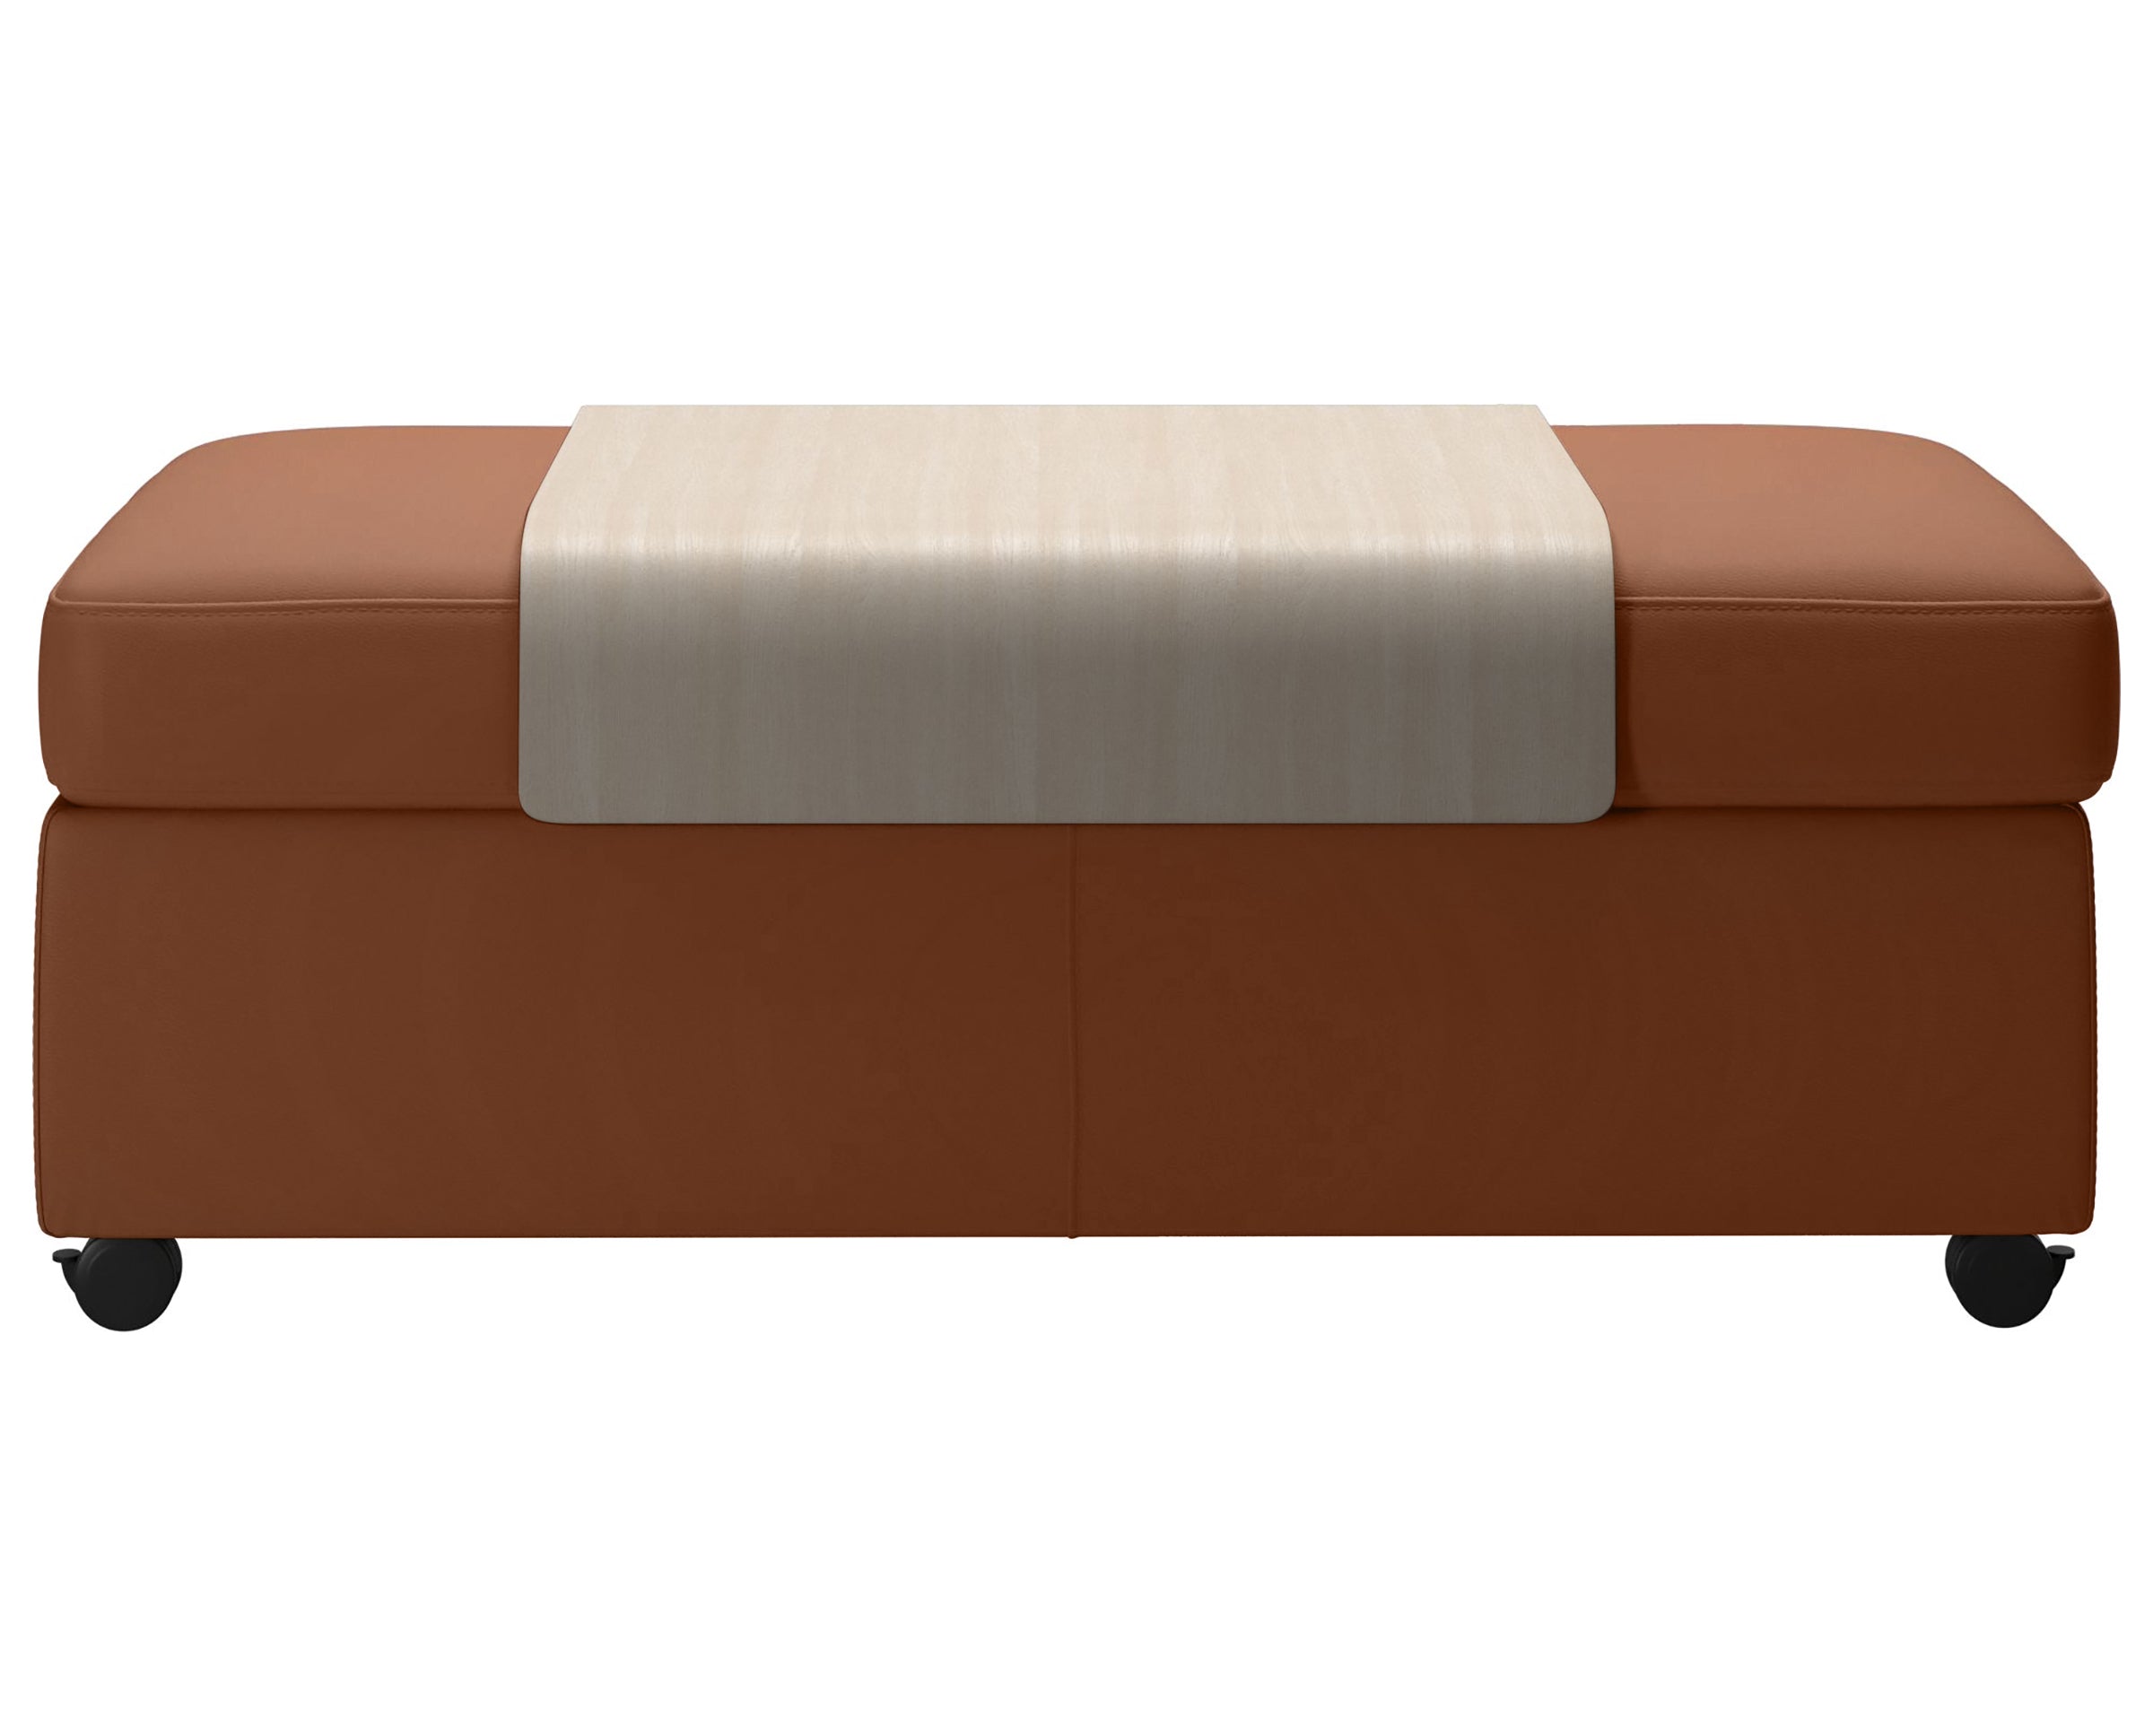 Paloma Leather New Cognac and Whitewash Finish | Stressless Double Ottoman with Table | Valley Ridge Furniture